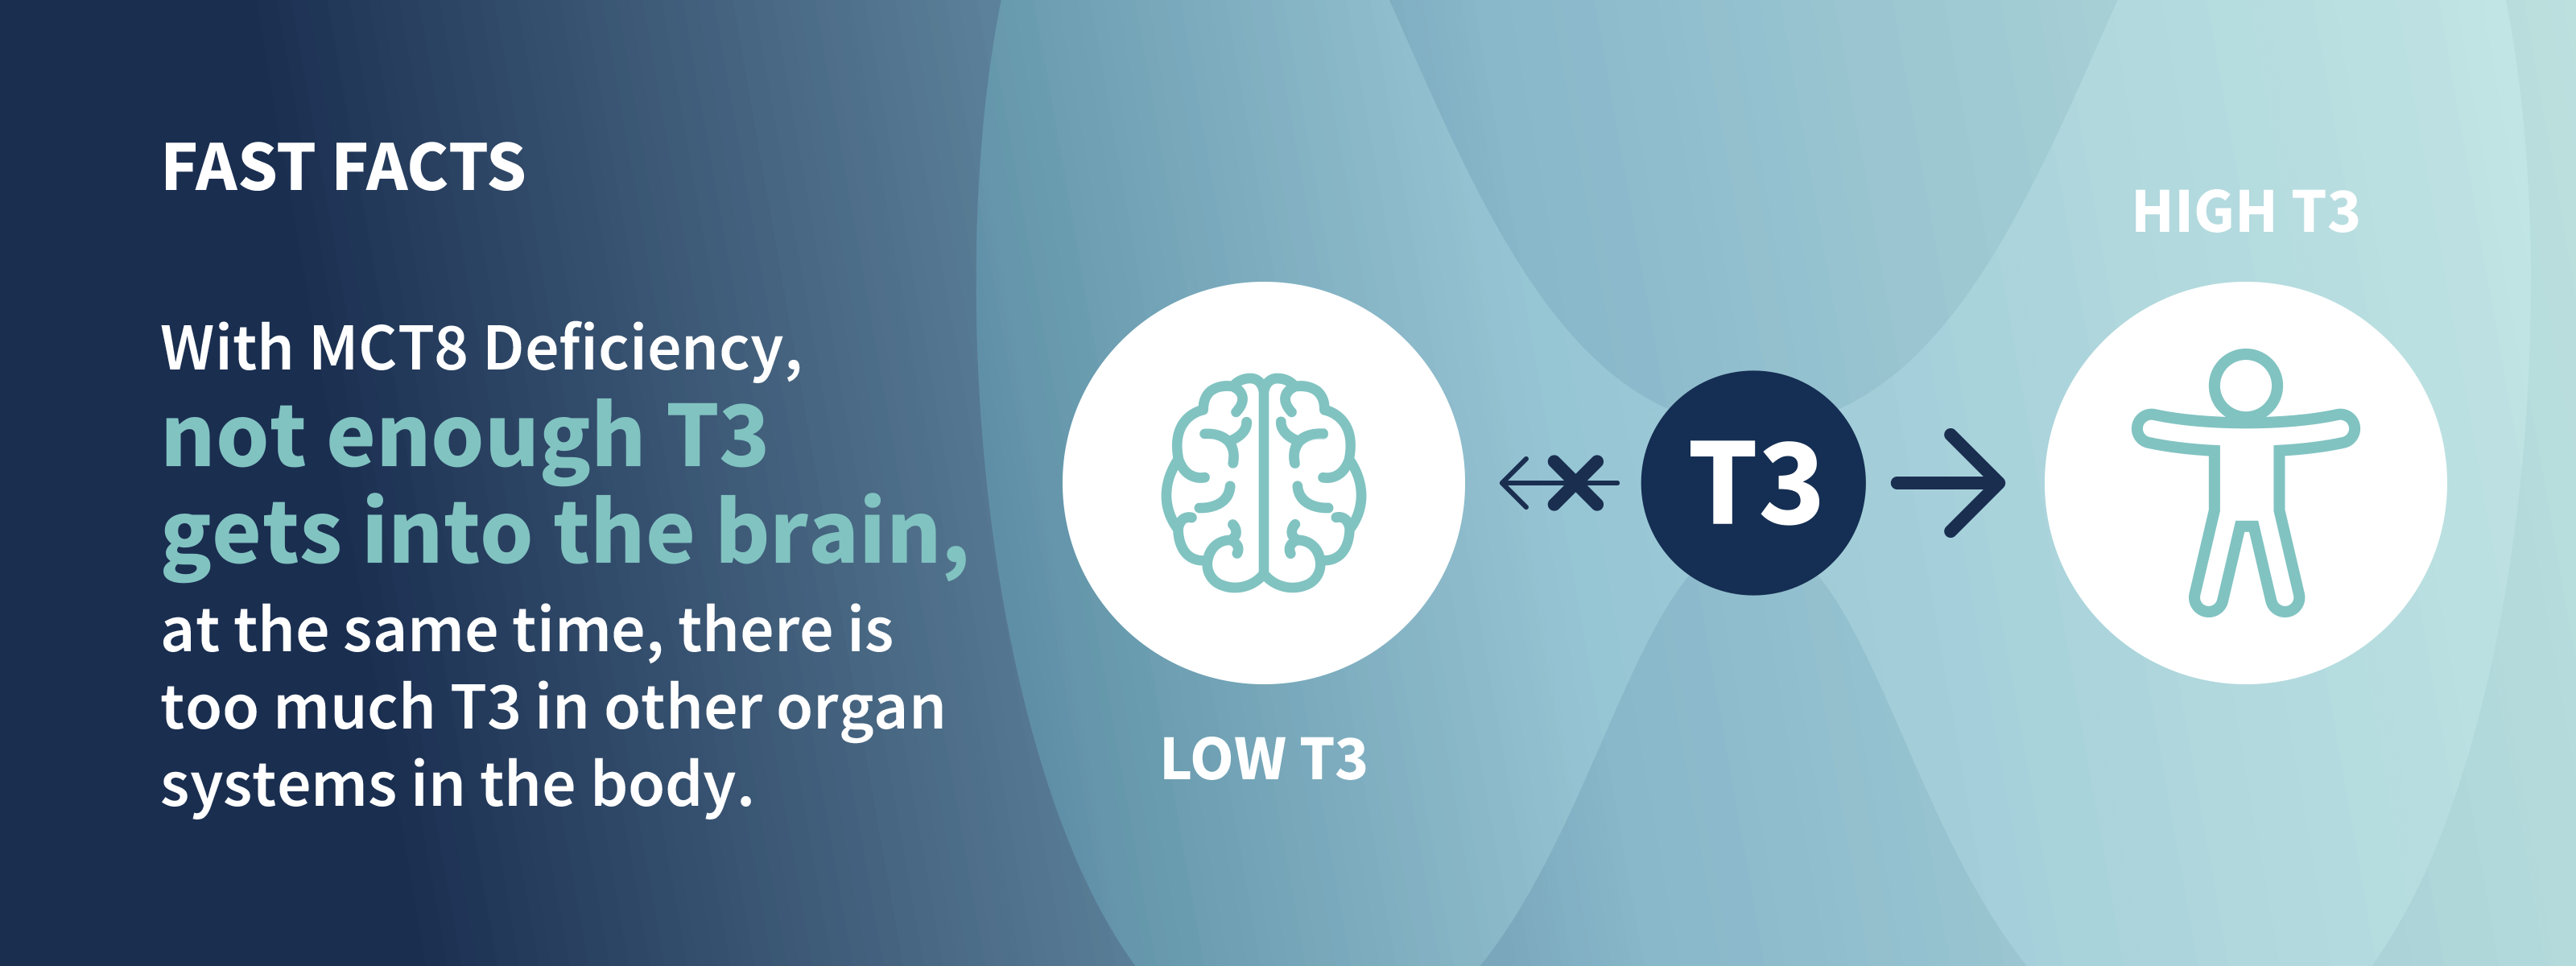 With MCT8 Deficiency, not enough T3 gets into the brain, at the same time, there is too much T3 in other organ systems in the body.